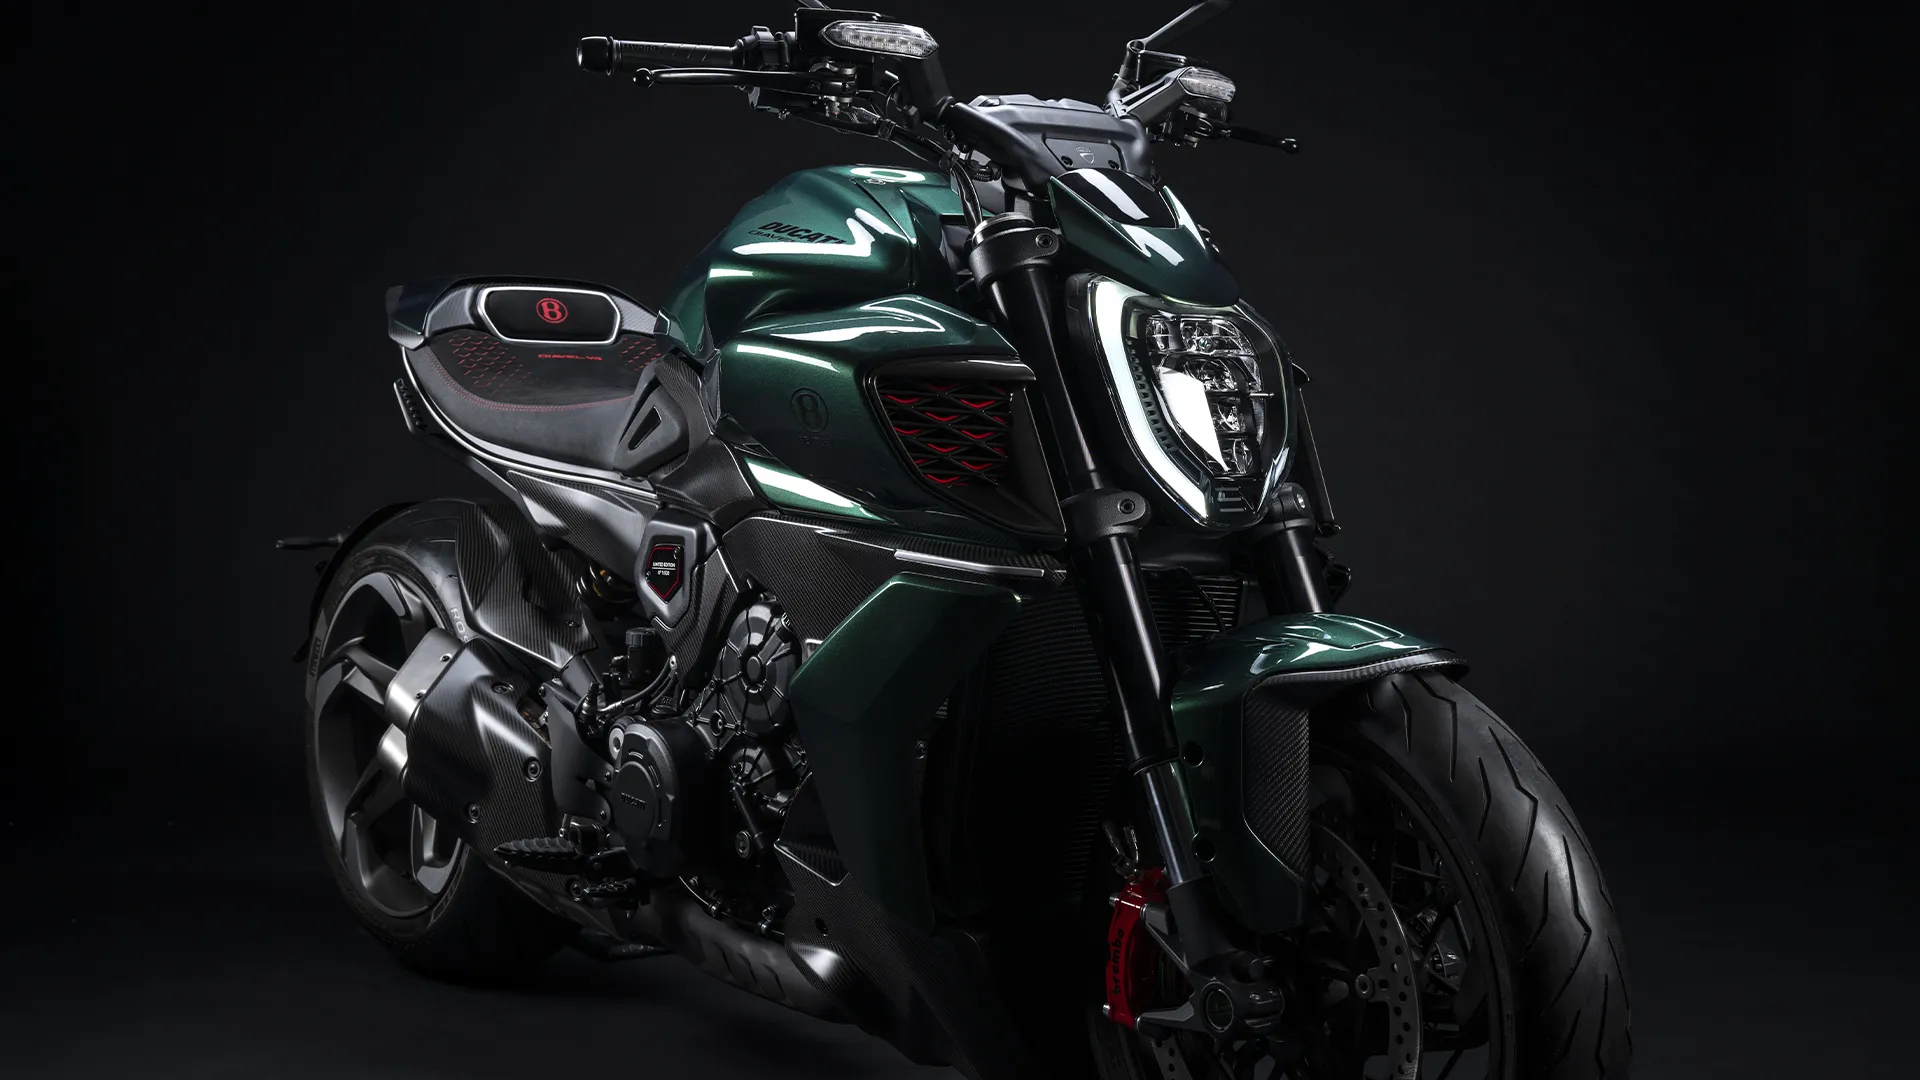 Ducati-Diavel-V4-for-Bentley-DWP24-Overview-gallery-1920x1080-05